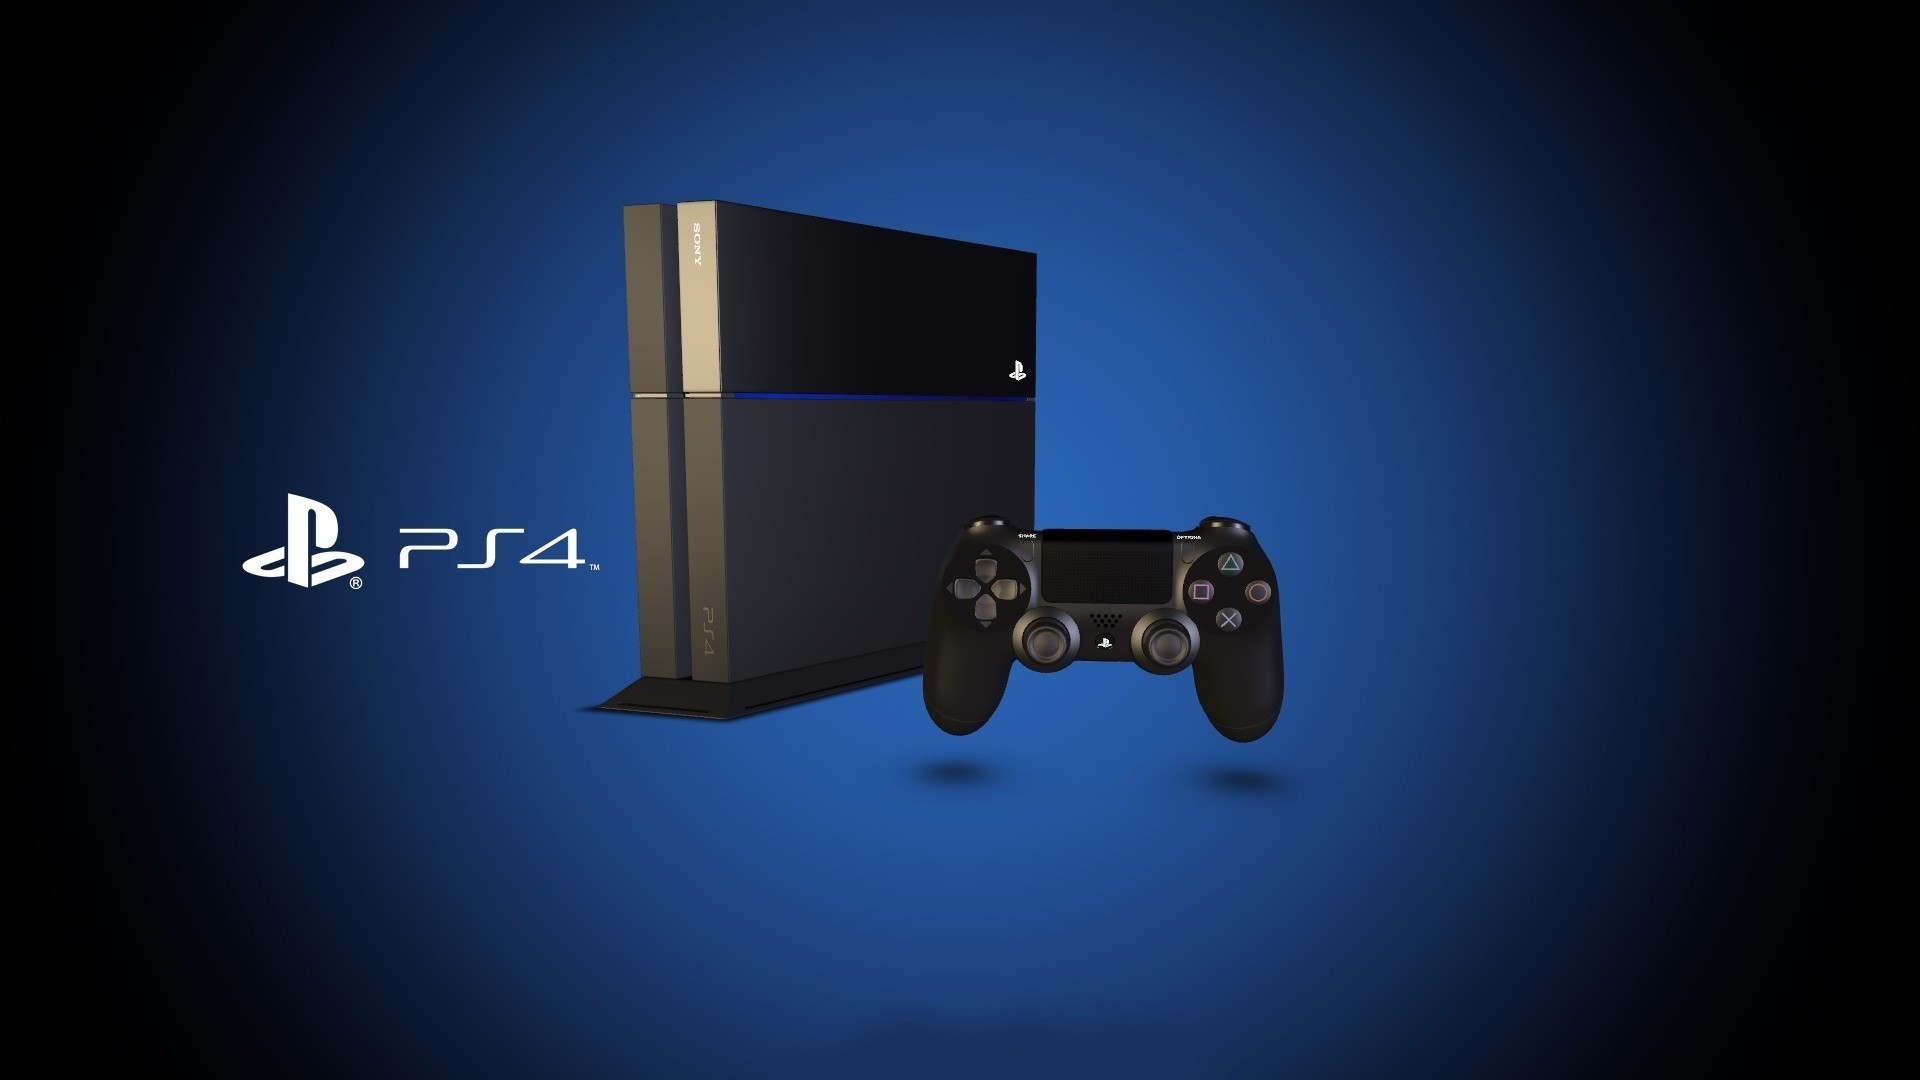  ps4 sony game console asiatic asian wallpapers hi tech   download